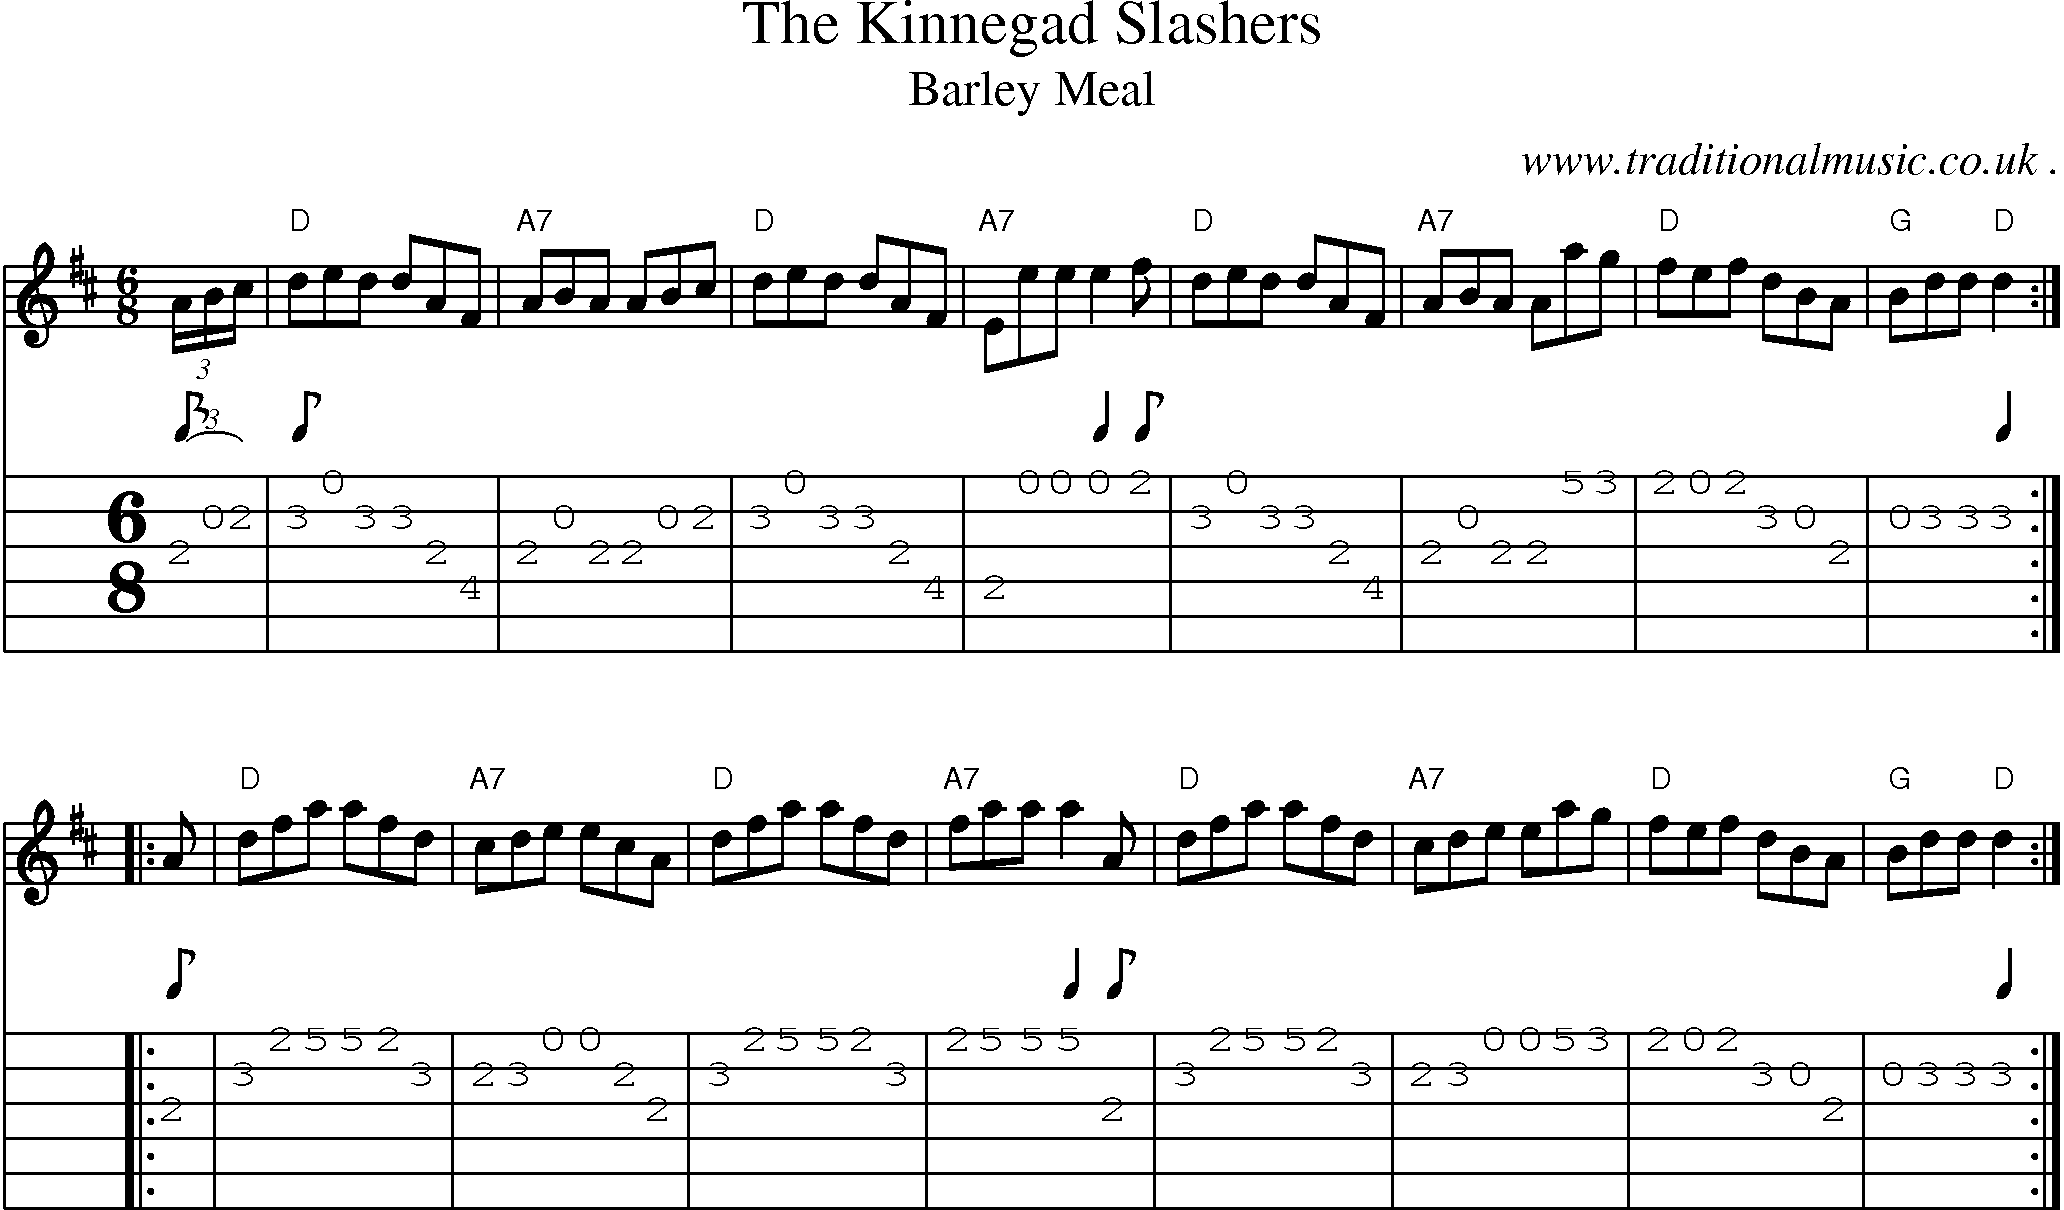 Sheet-music  score, Chords and Guitar Tabs for The Kinnegad Slashers